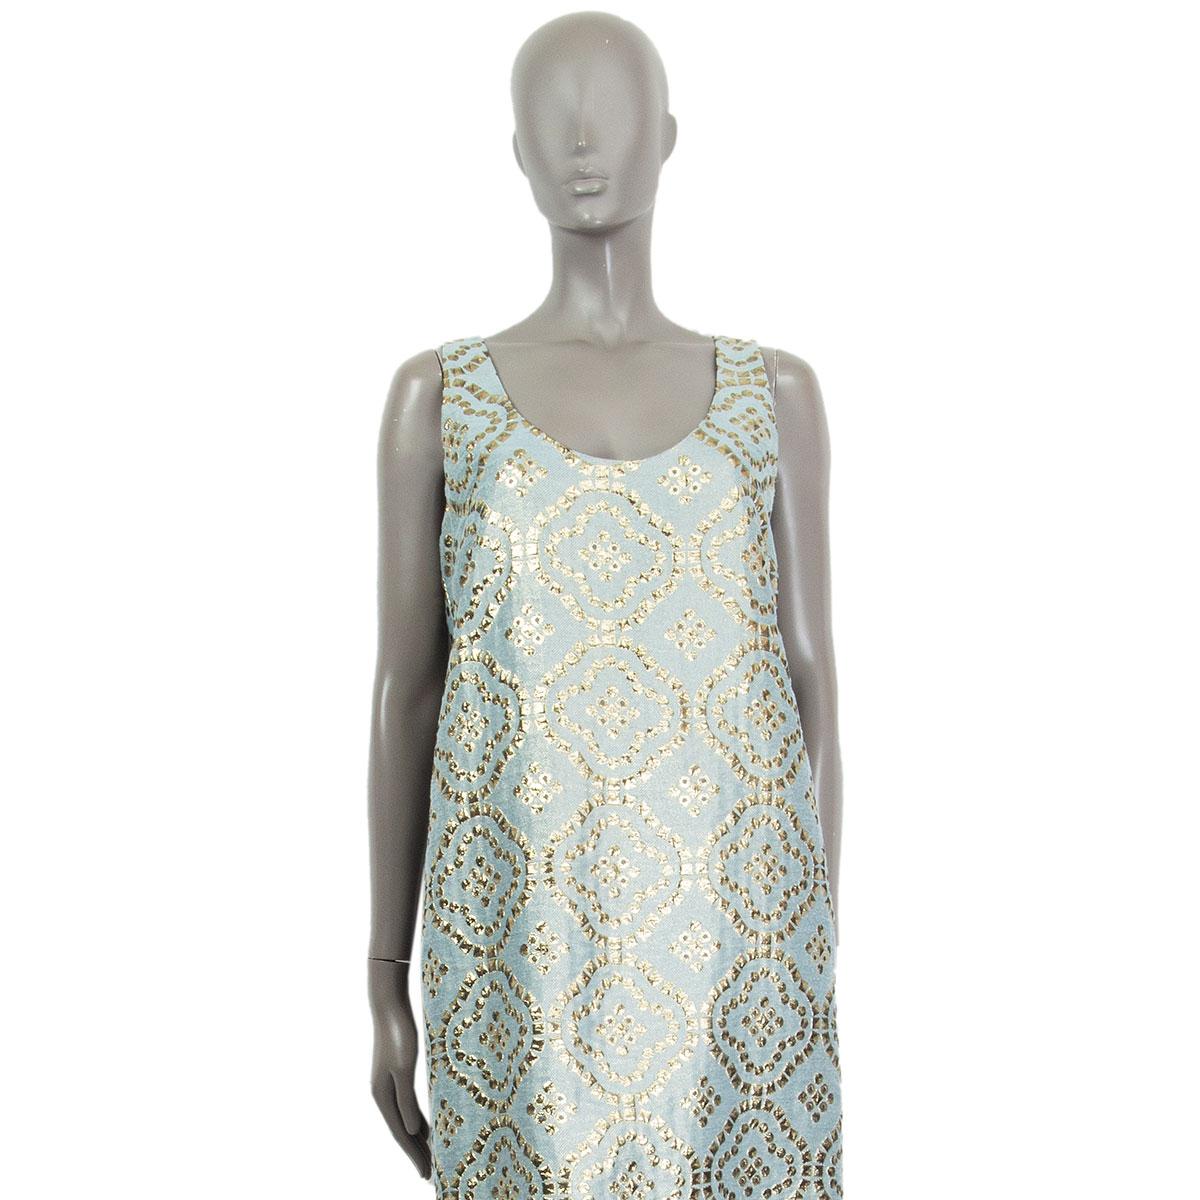 100% authentic R.E.D by Valentino lame' sleeveless shift dress in dove and gold acetate (42%), cotton (31%) and polyester (27%). Closes with a concealed zipper on the side. Lined in light blue cupro (50%) and viscose (50%). Has been worn and is in